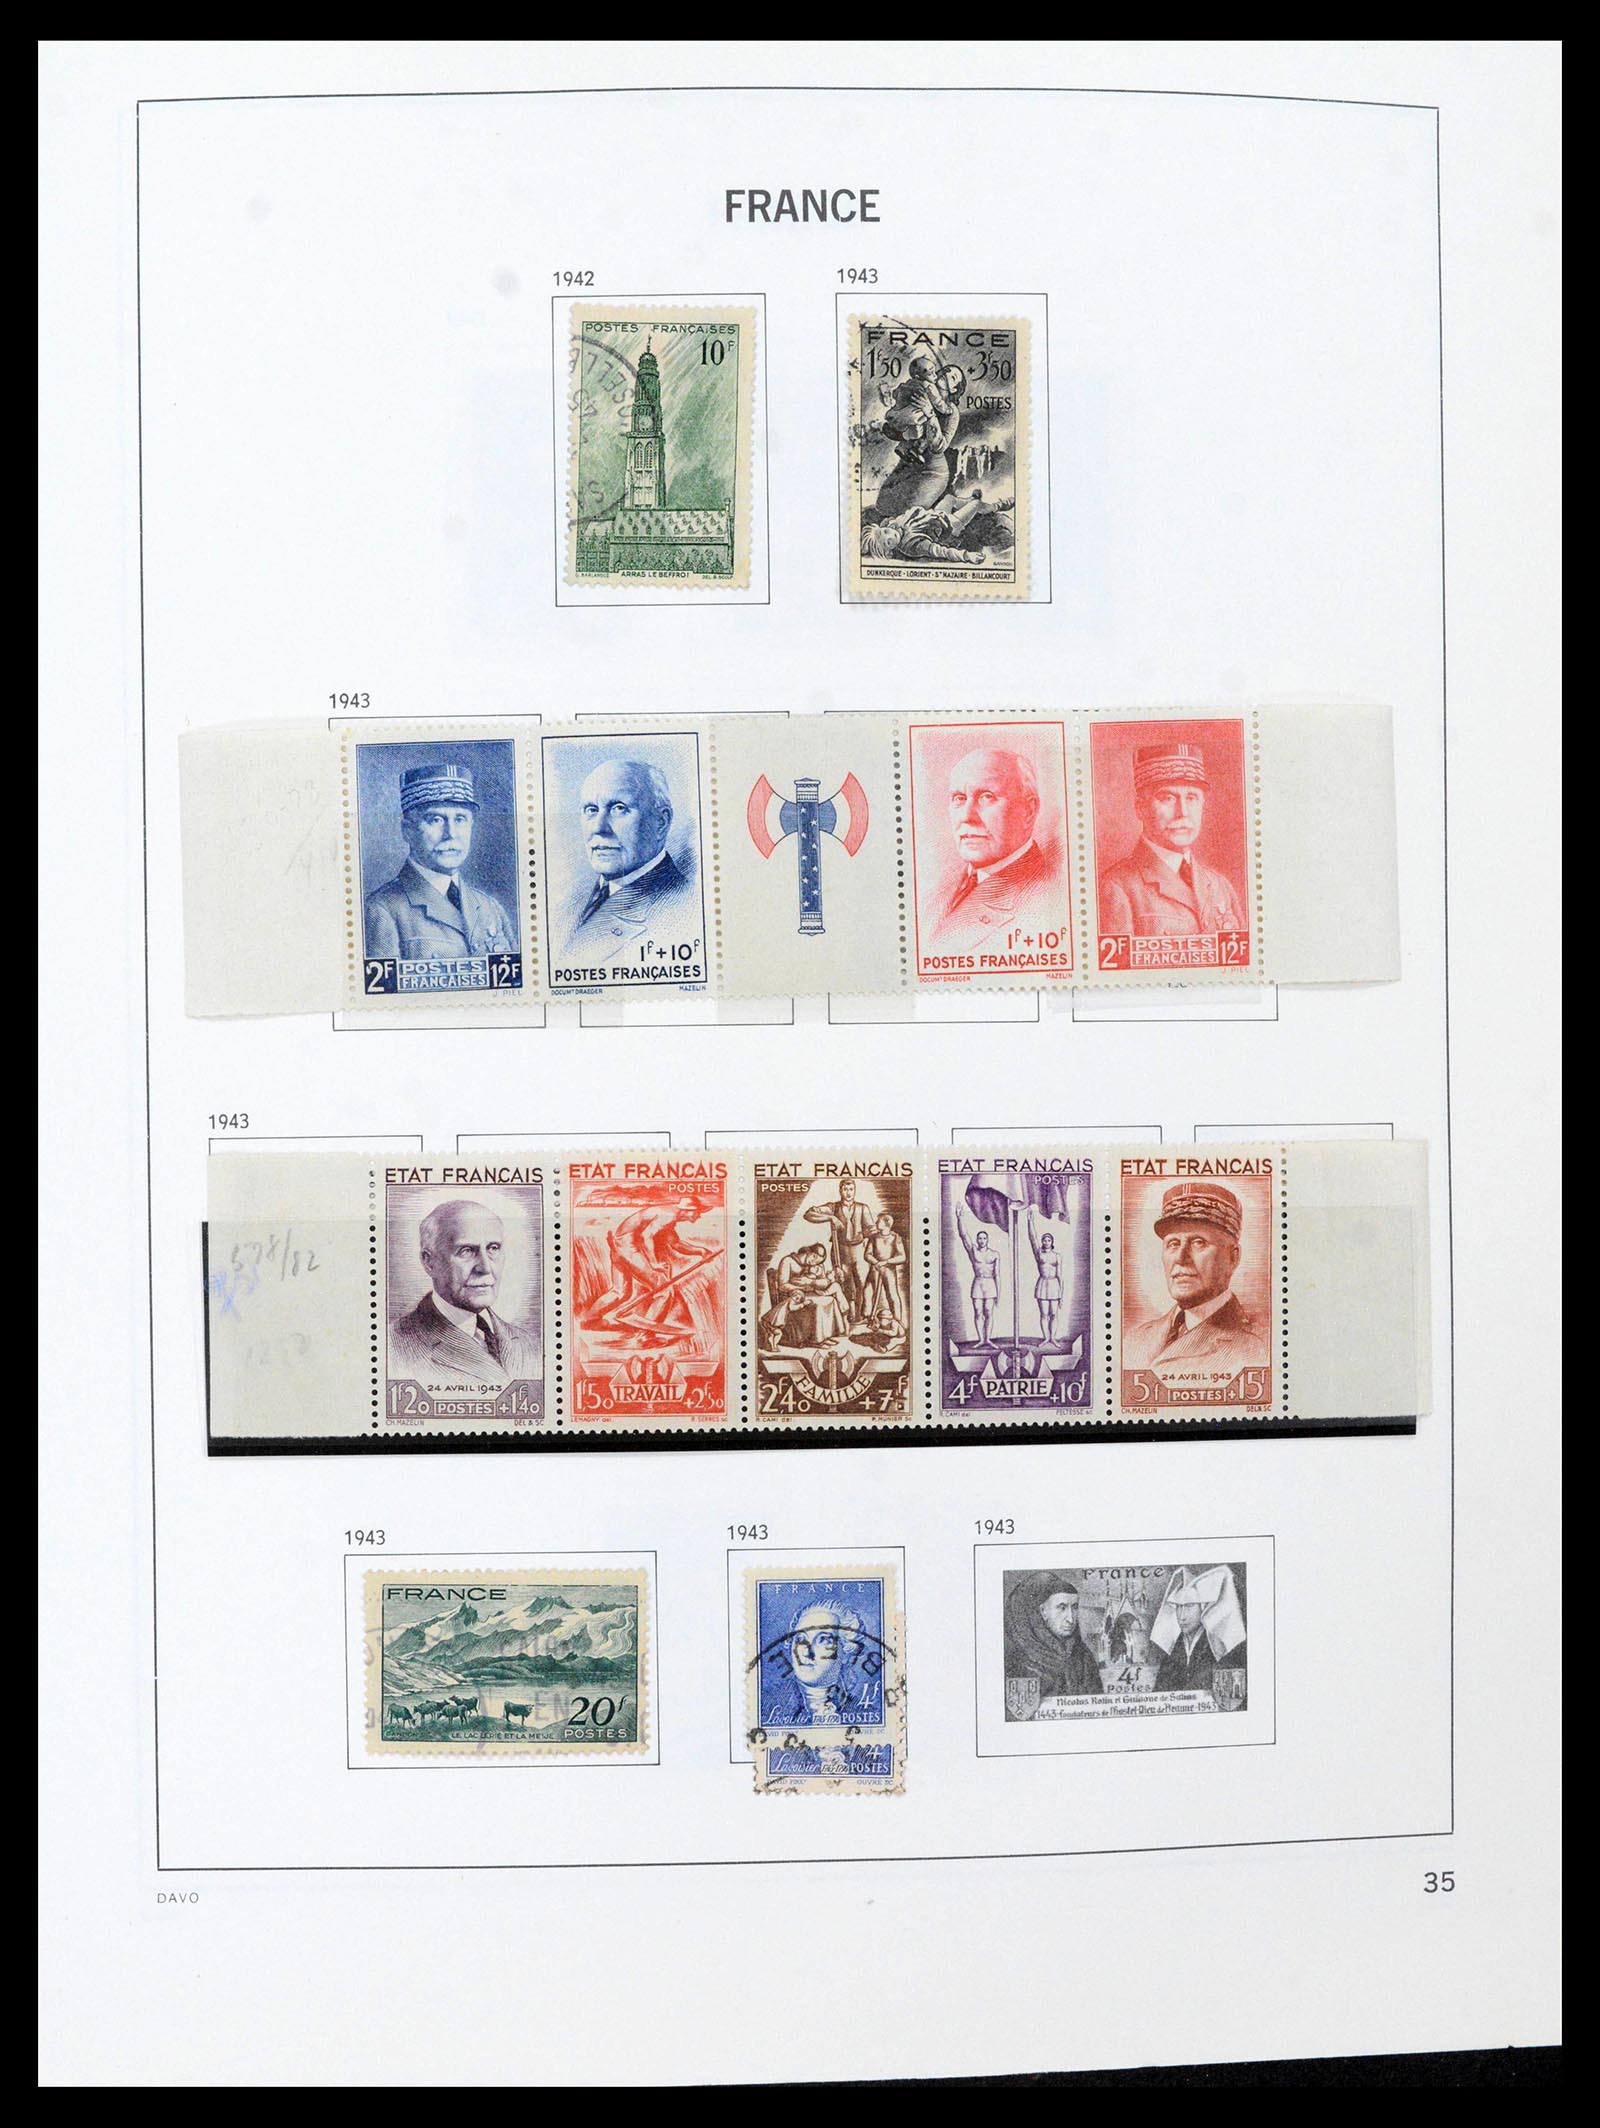 39164 0035 - Stamp collection 39164 France 1849-1981.